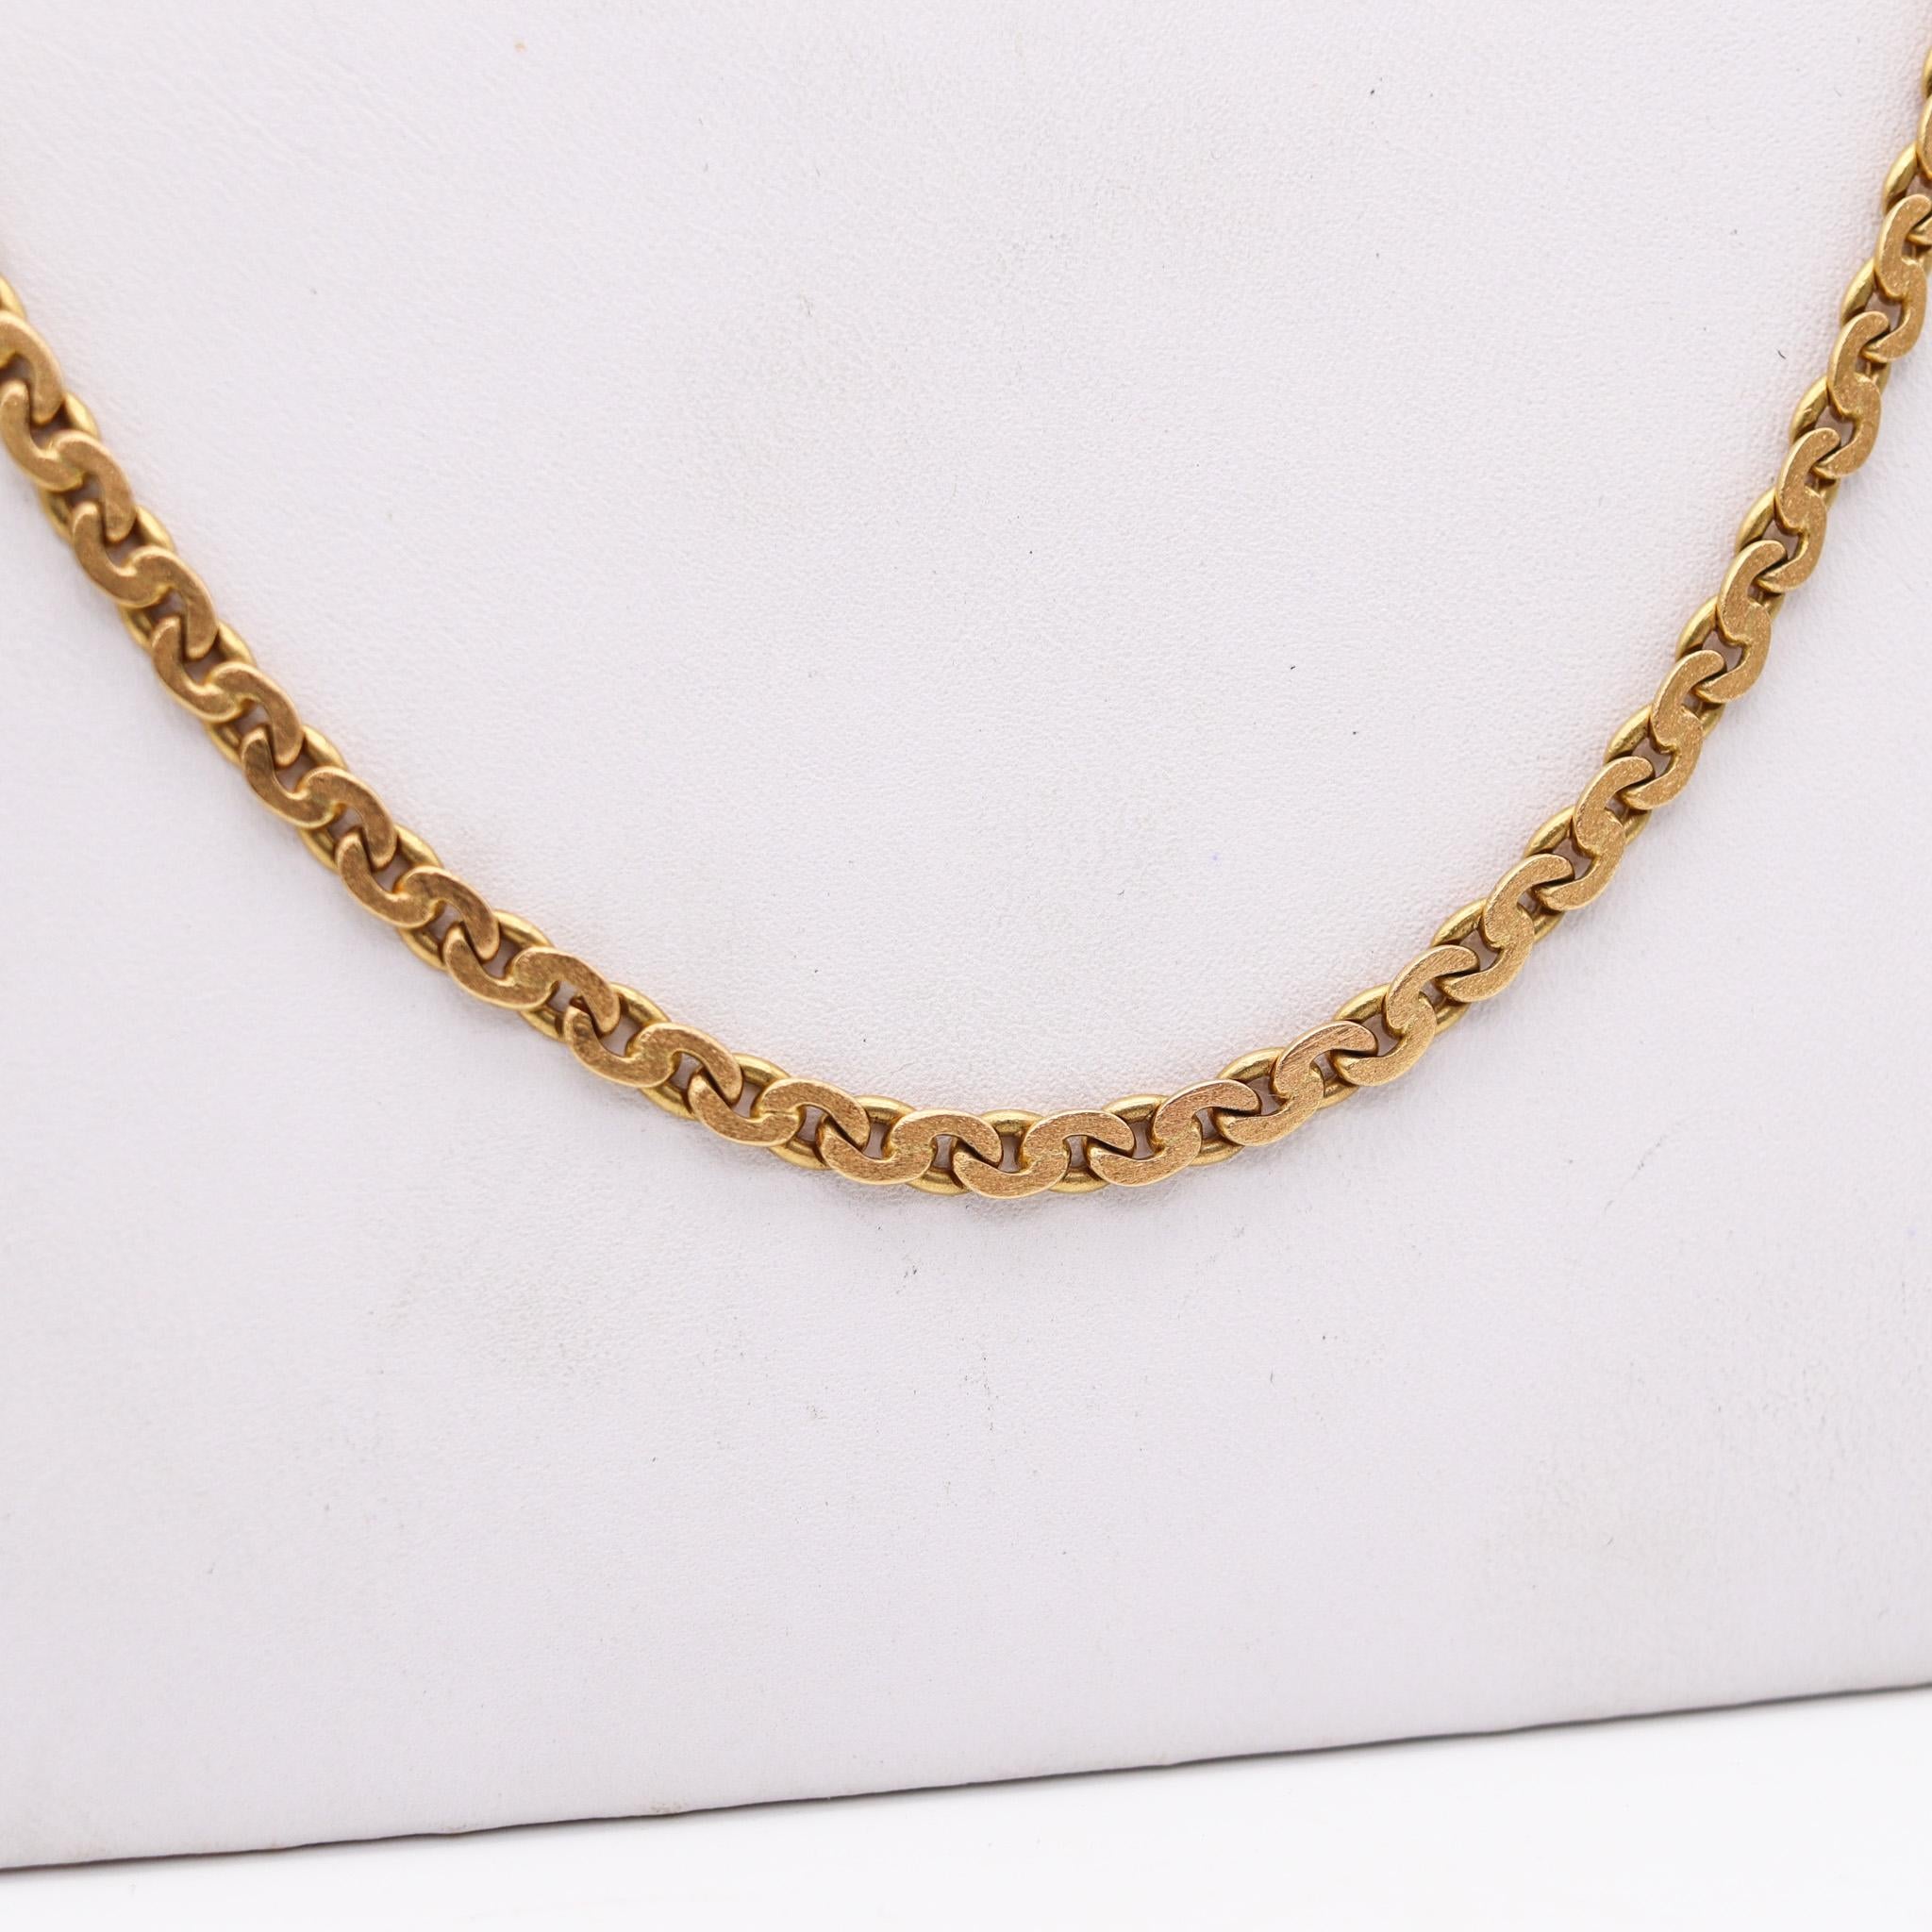 An art deco chain designed by Marchisio Napoleone.

A beautiful art deco chain, created in Torino Italy at the jewelry atelier of Marchisio Napoleone, back in the 1935. This long chain have a lenght of one meter and has been crafted with intricate